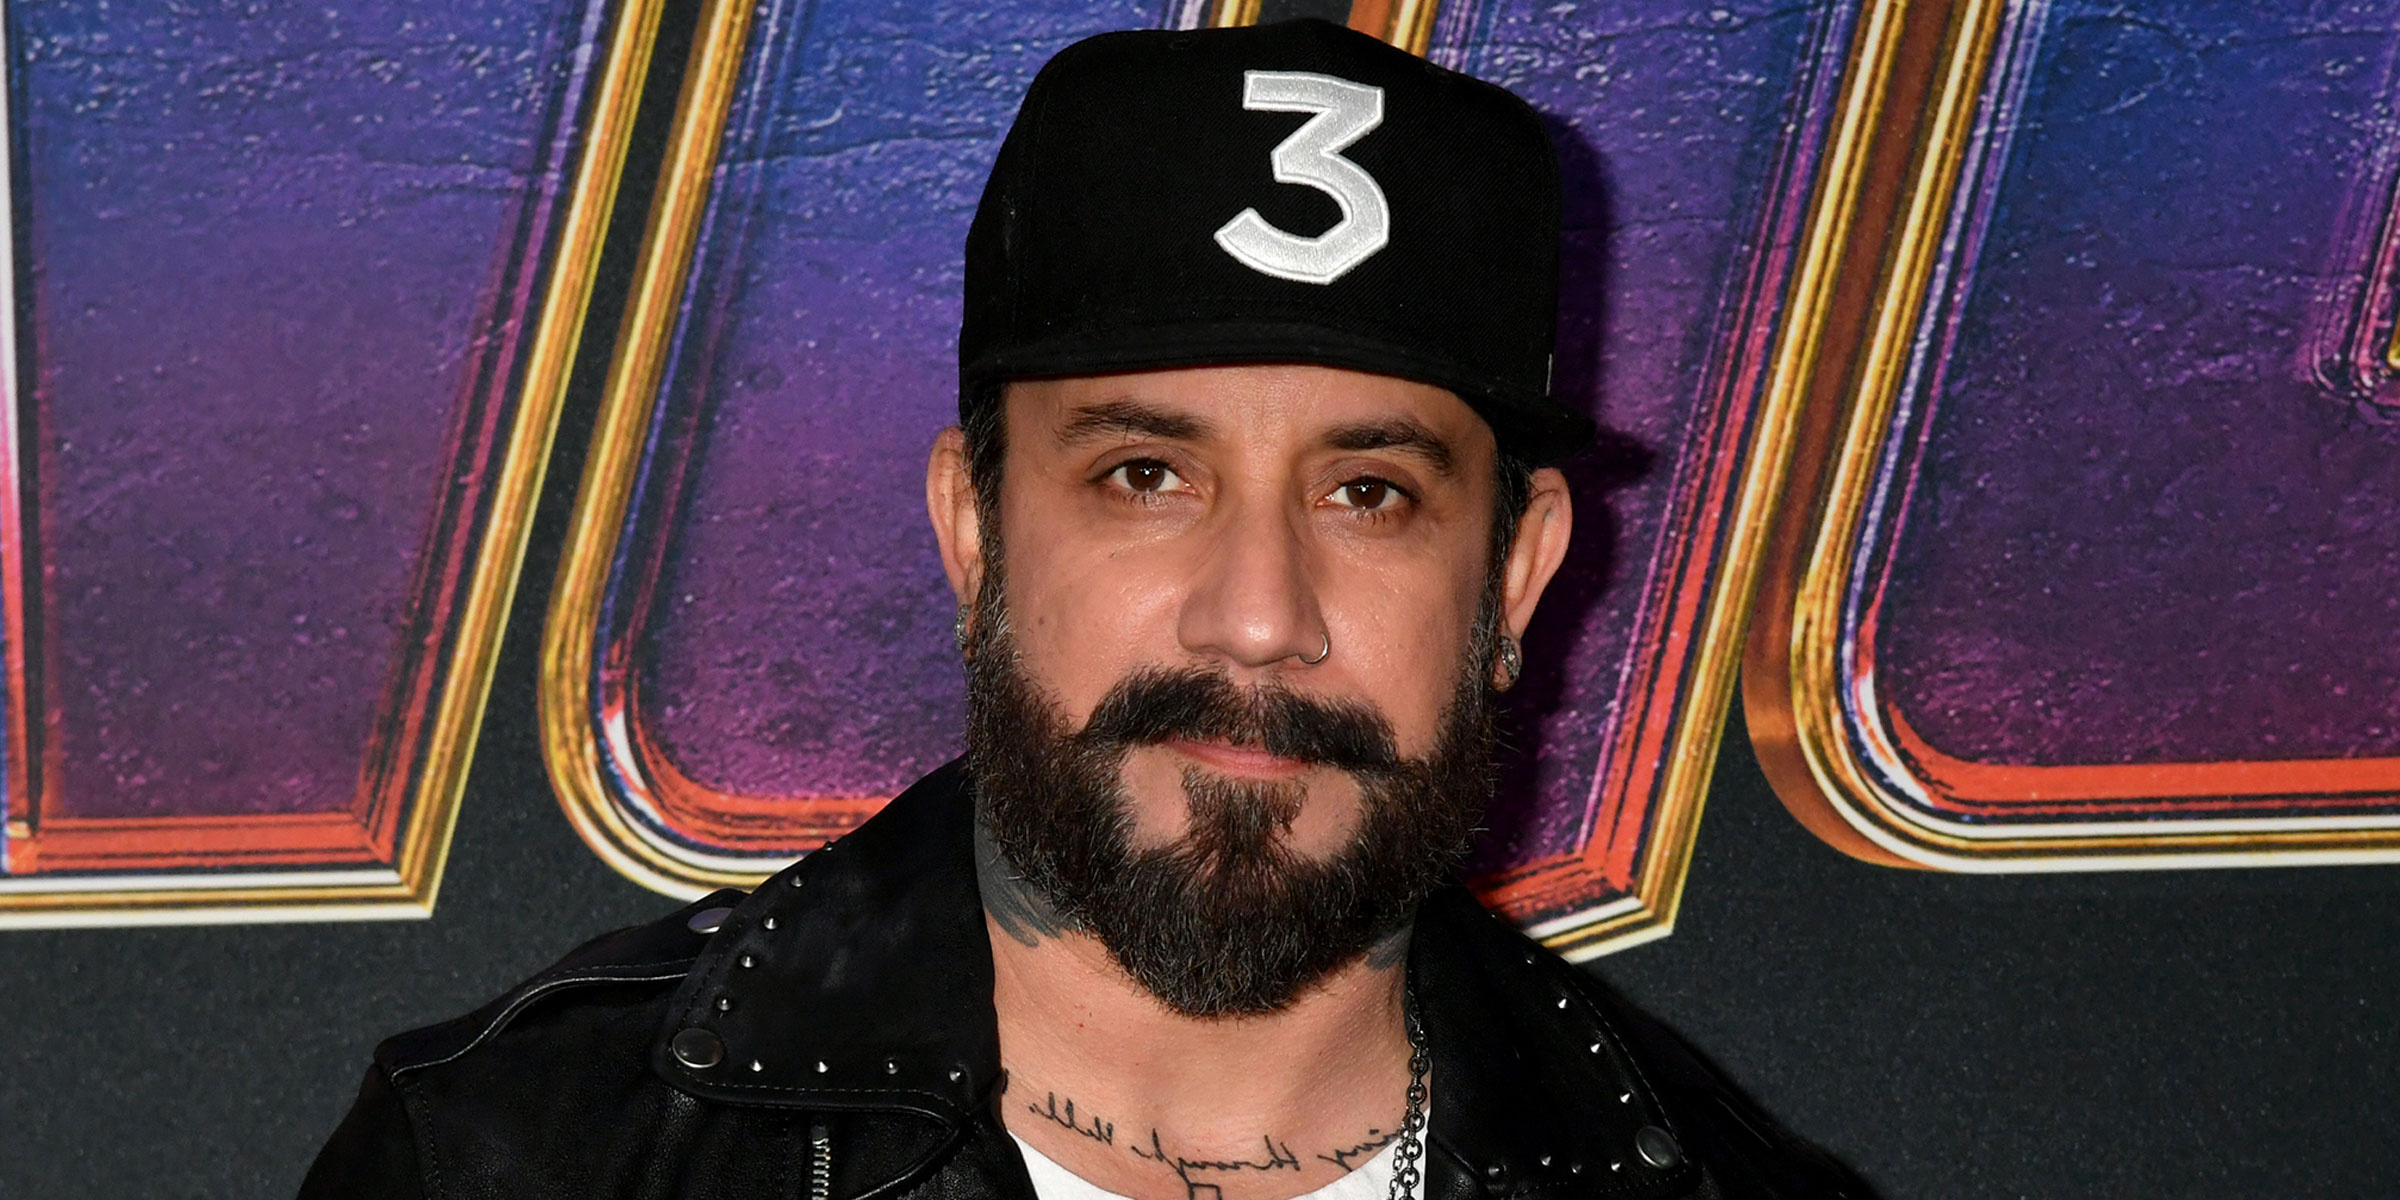 AJ McLean transformation, Before and after pictures, Impressive change, 2400x1200 Dual Screen Desktop